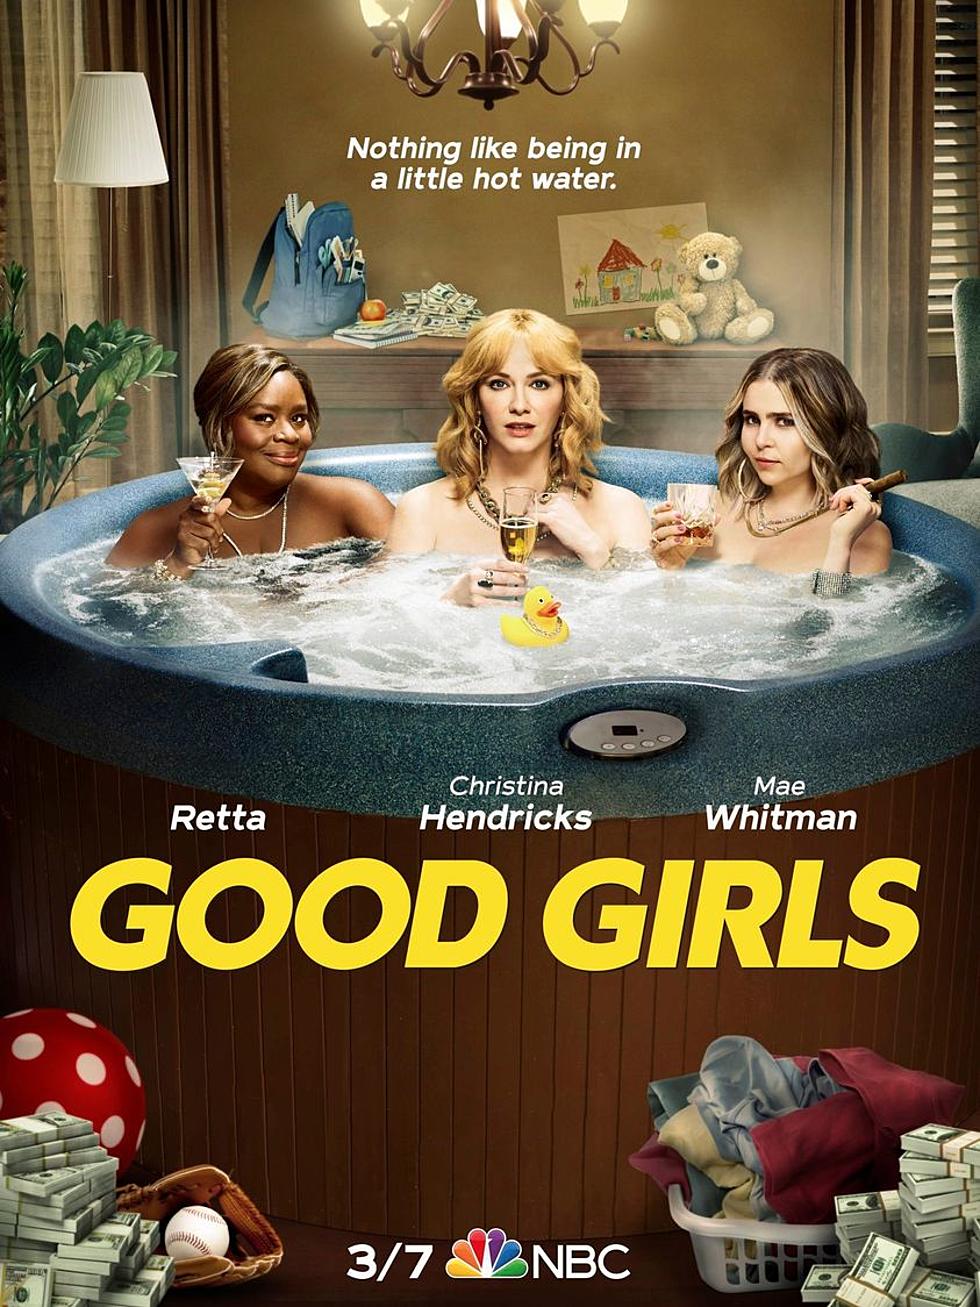 Did You Know The Show &#8220;Good Girls&#8221; Based In Michigan? [VIDEO]